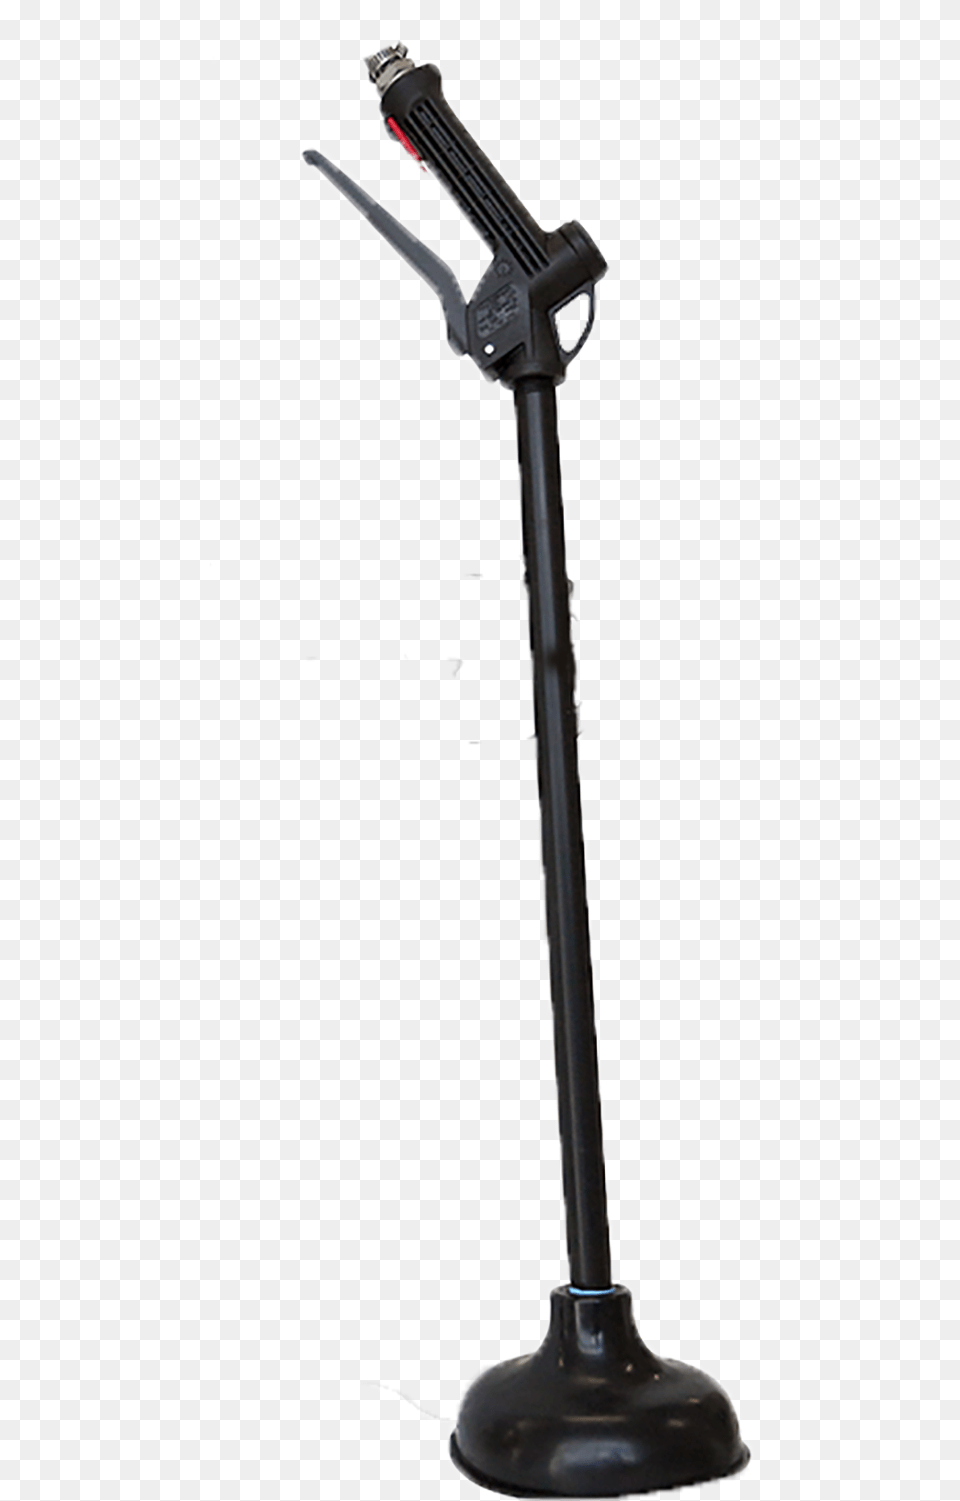 Foaming Plunger Attachment Baseball Bat, Electrical Device, Lamp, Microphone, E-scooter Free Png